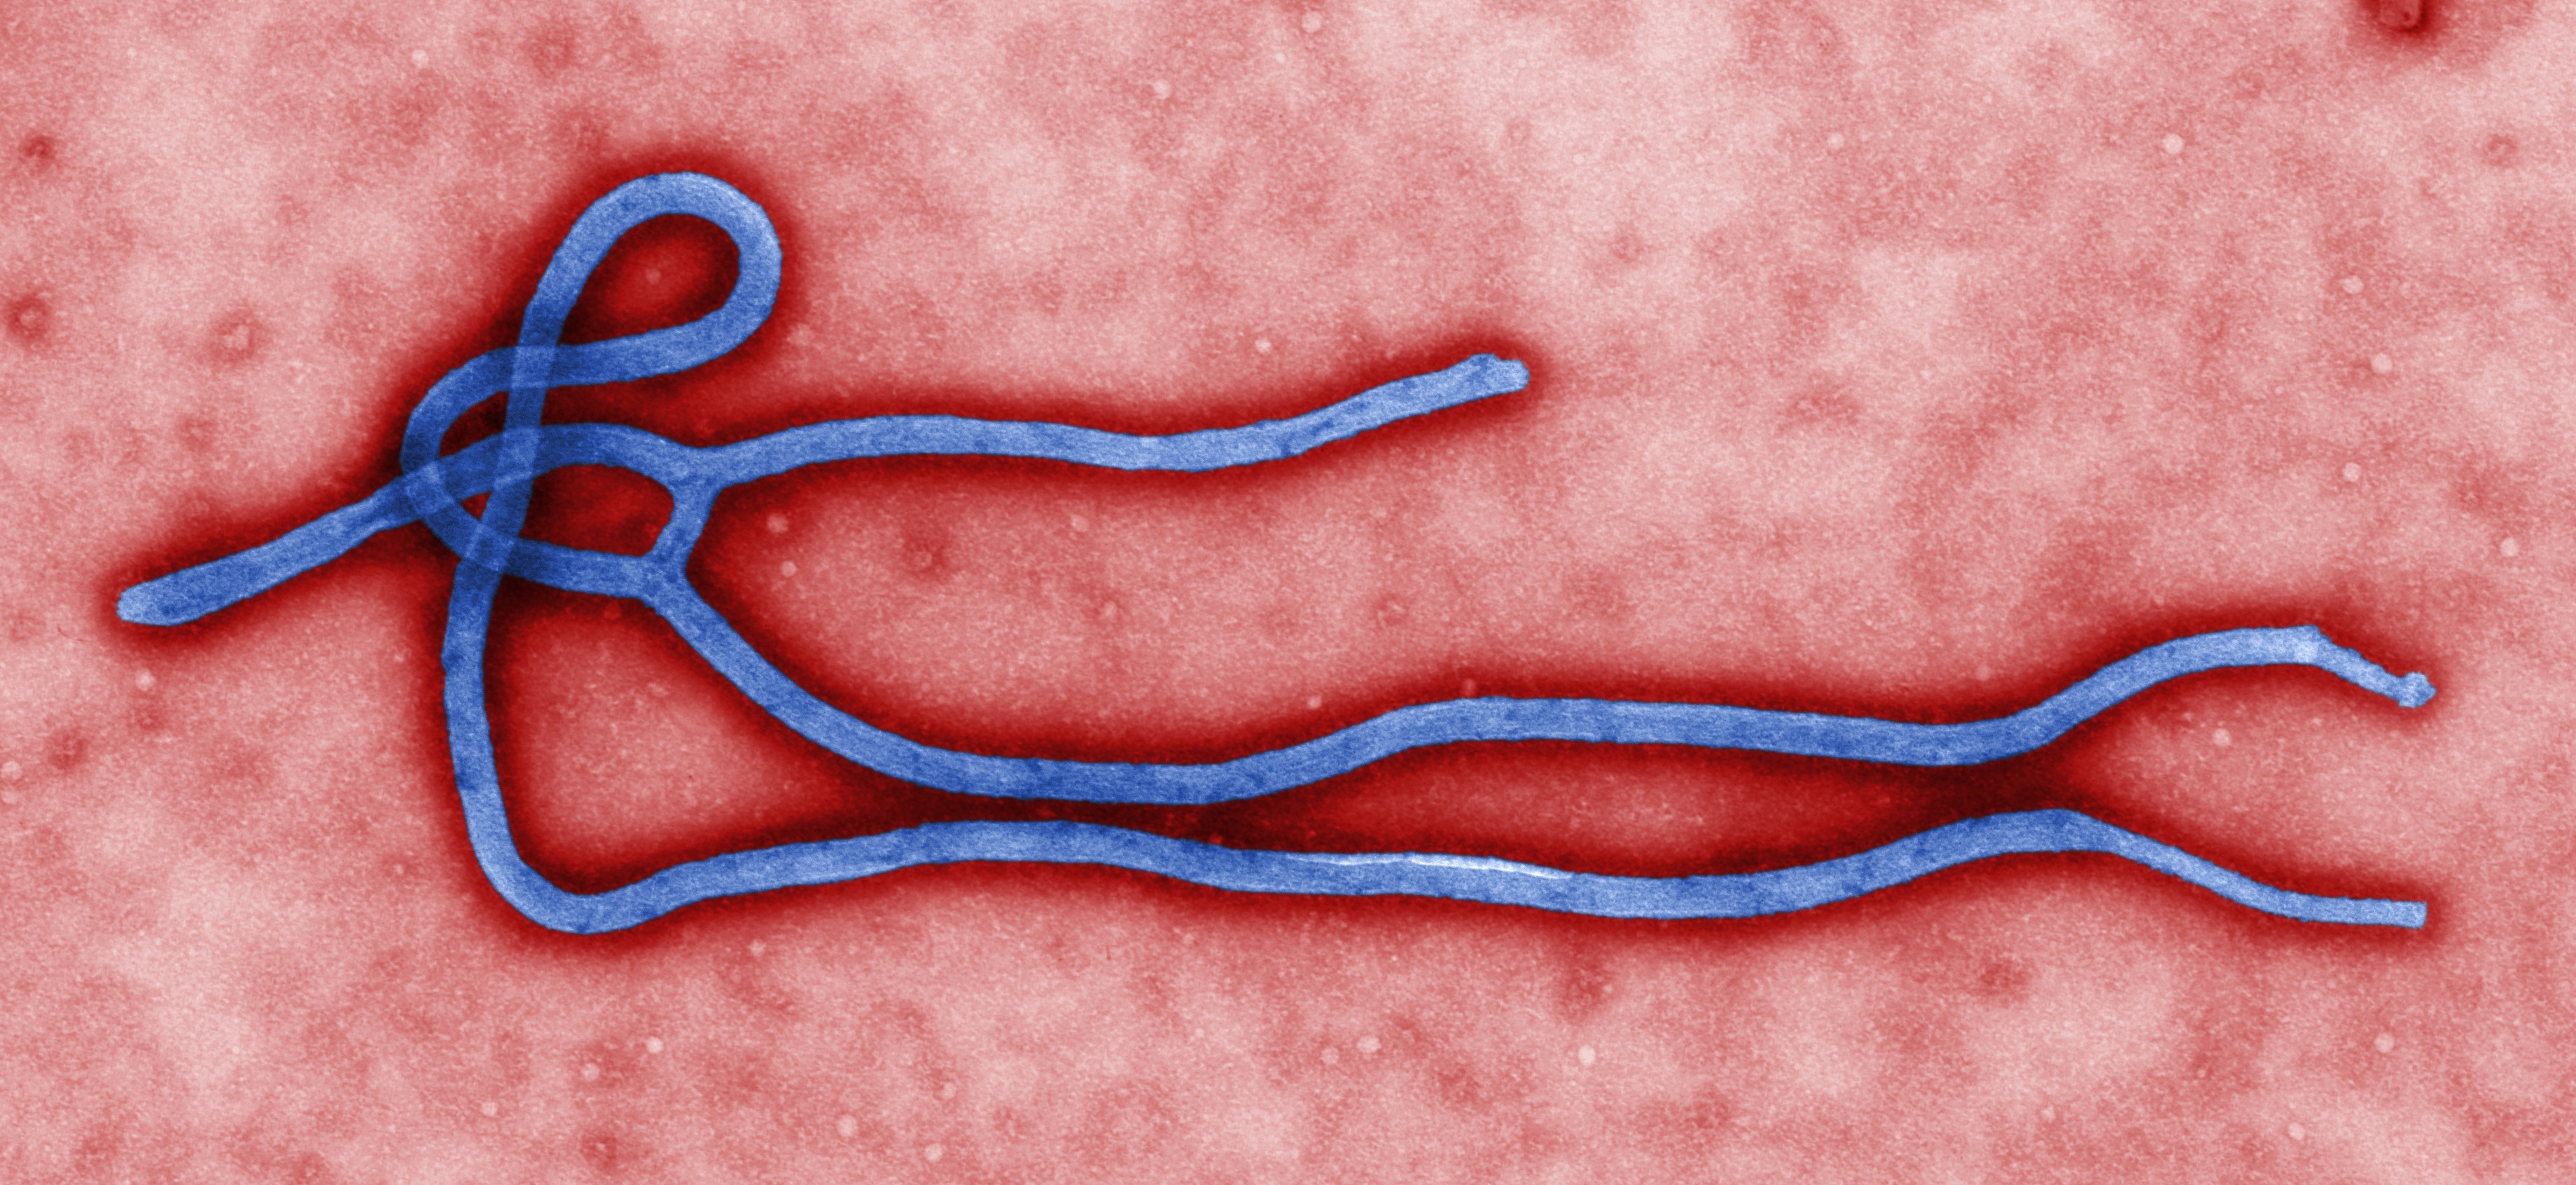 The Best Ways to Donate to Help Fight Ebola